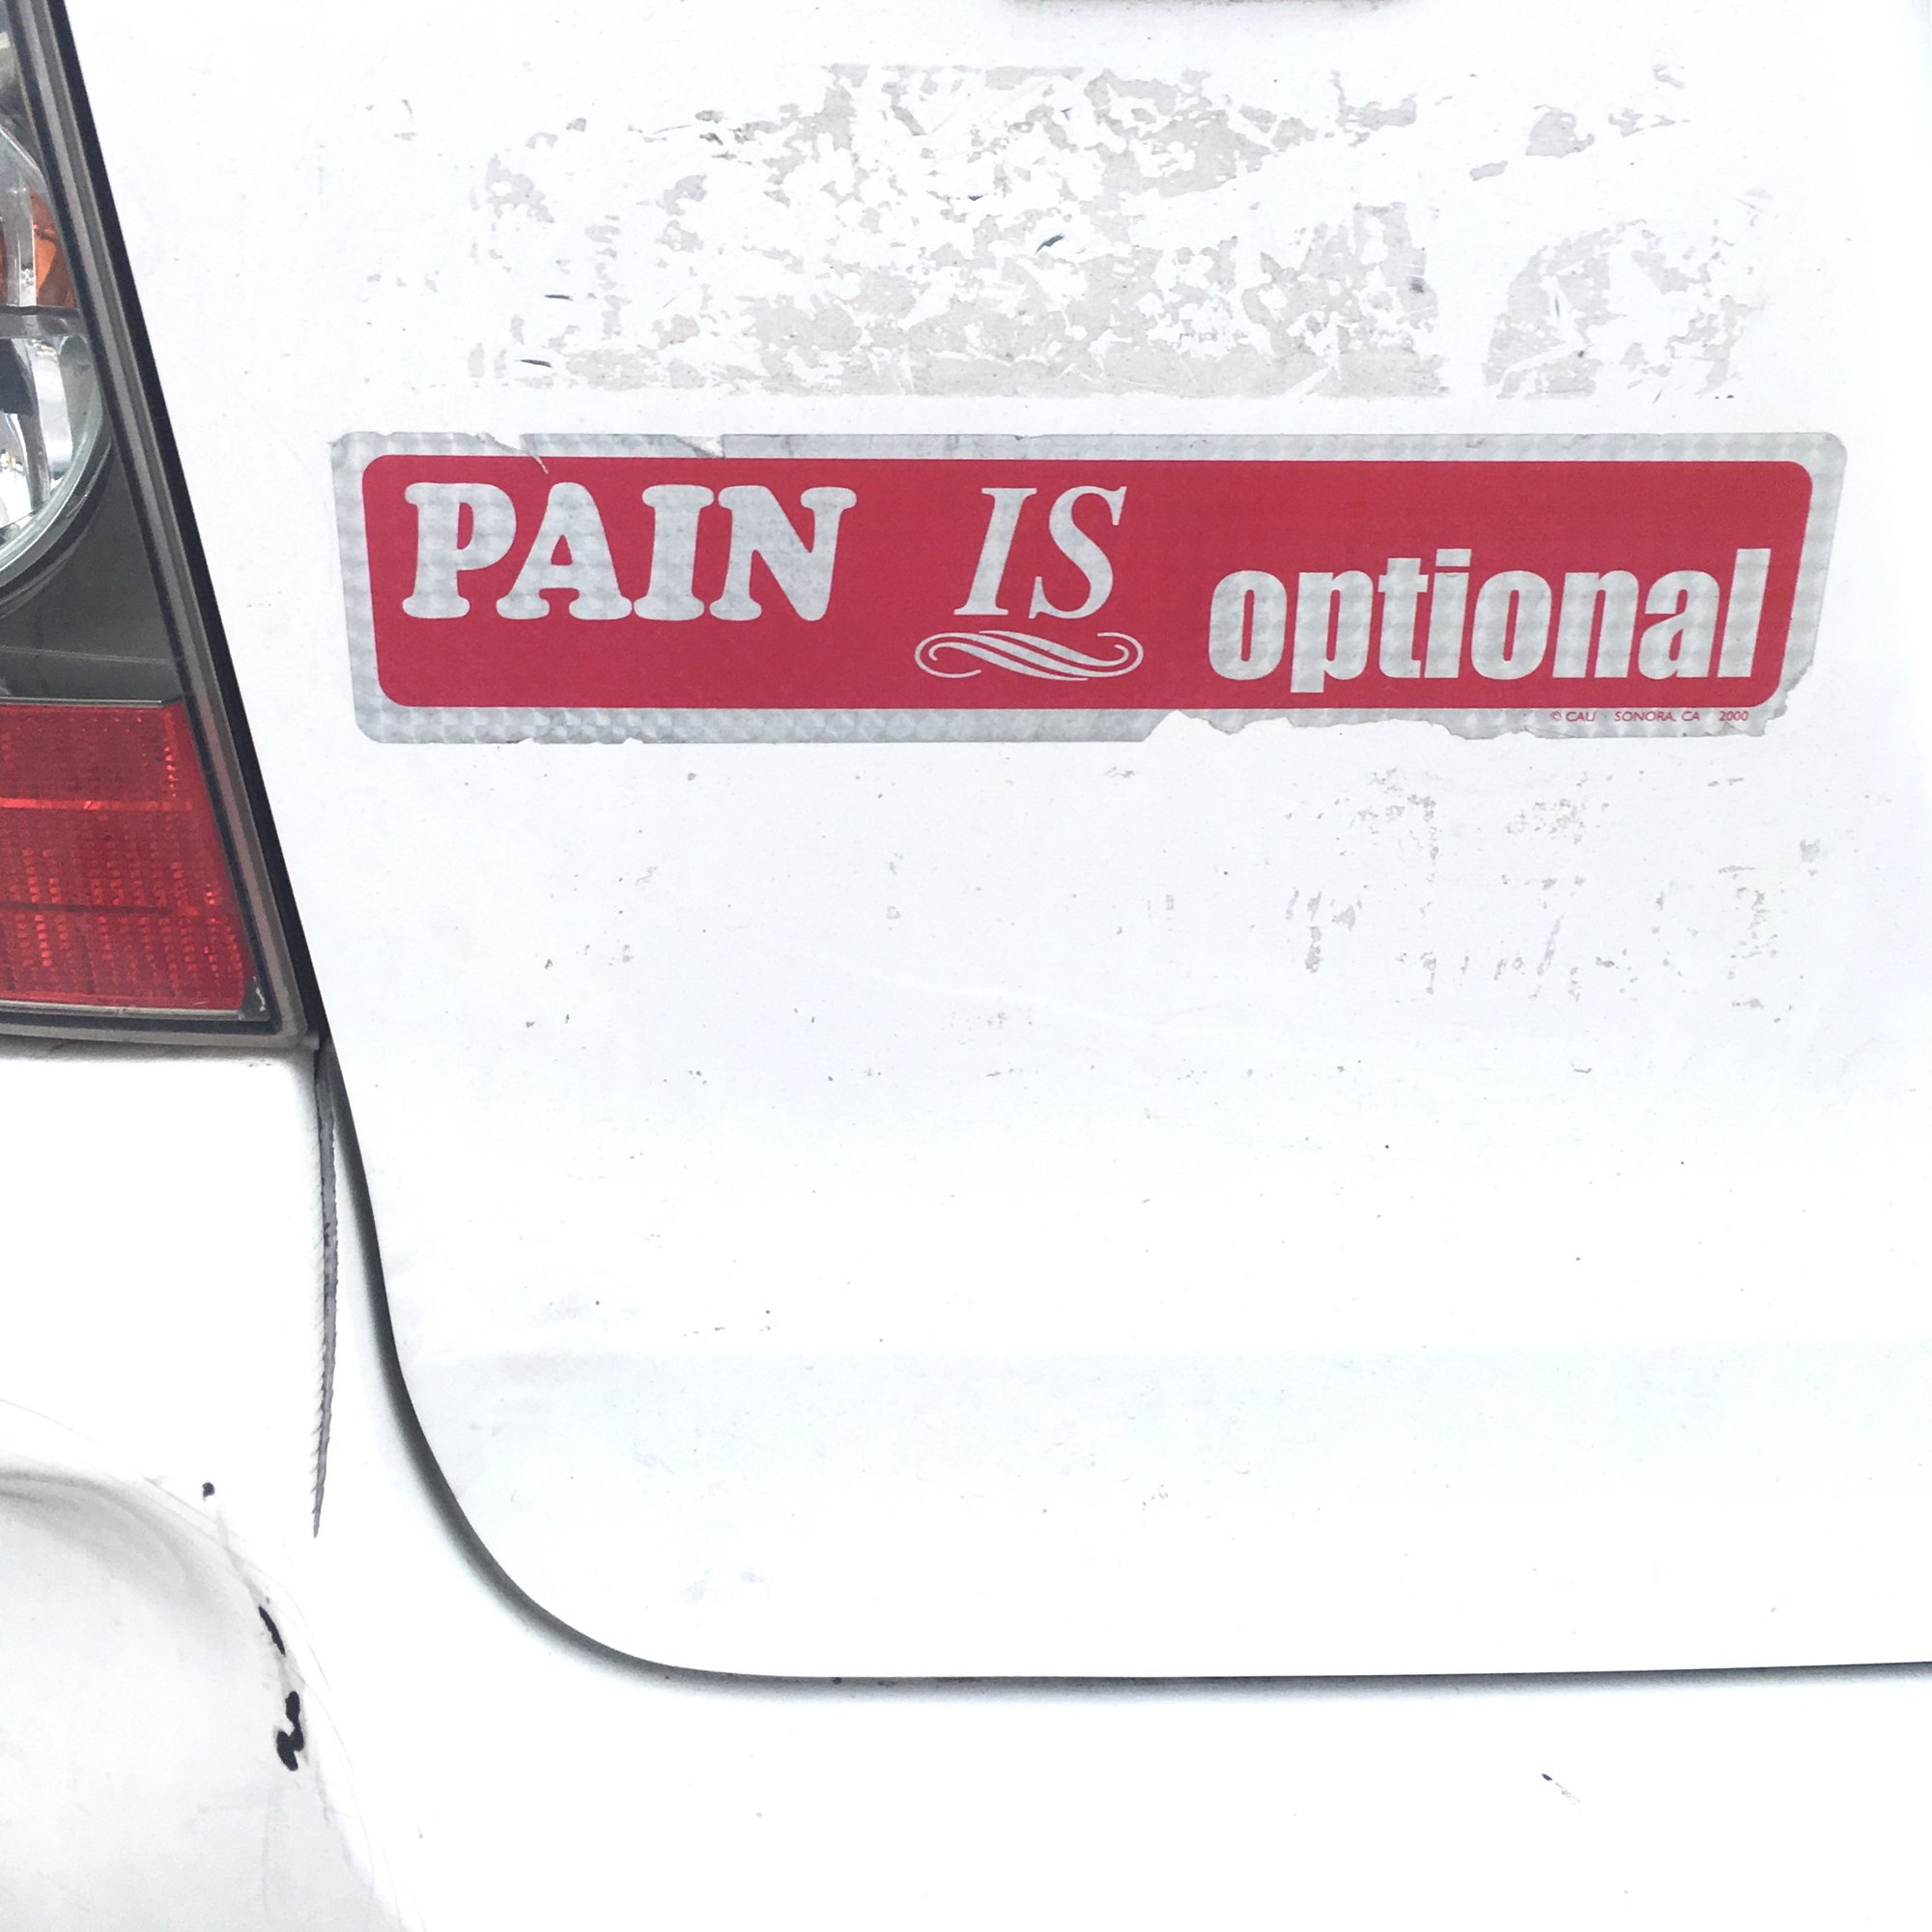  Pain Is Optional (Wal-Mart parking lot), 2018. 